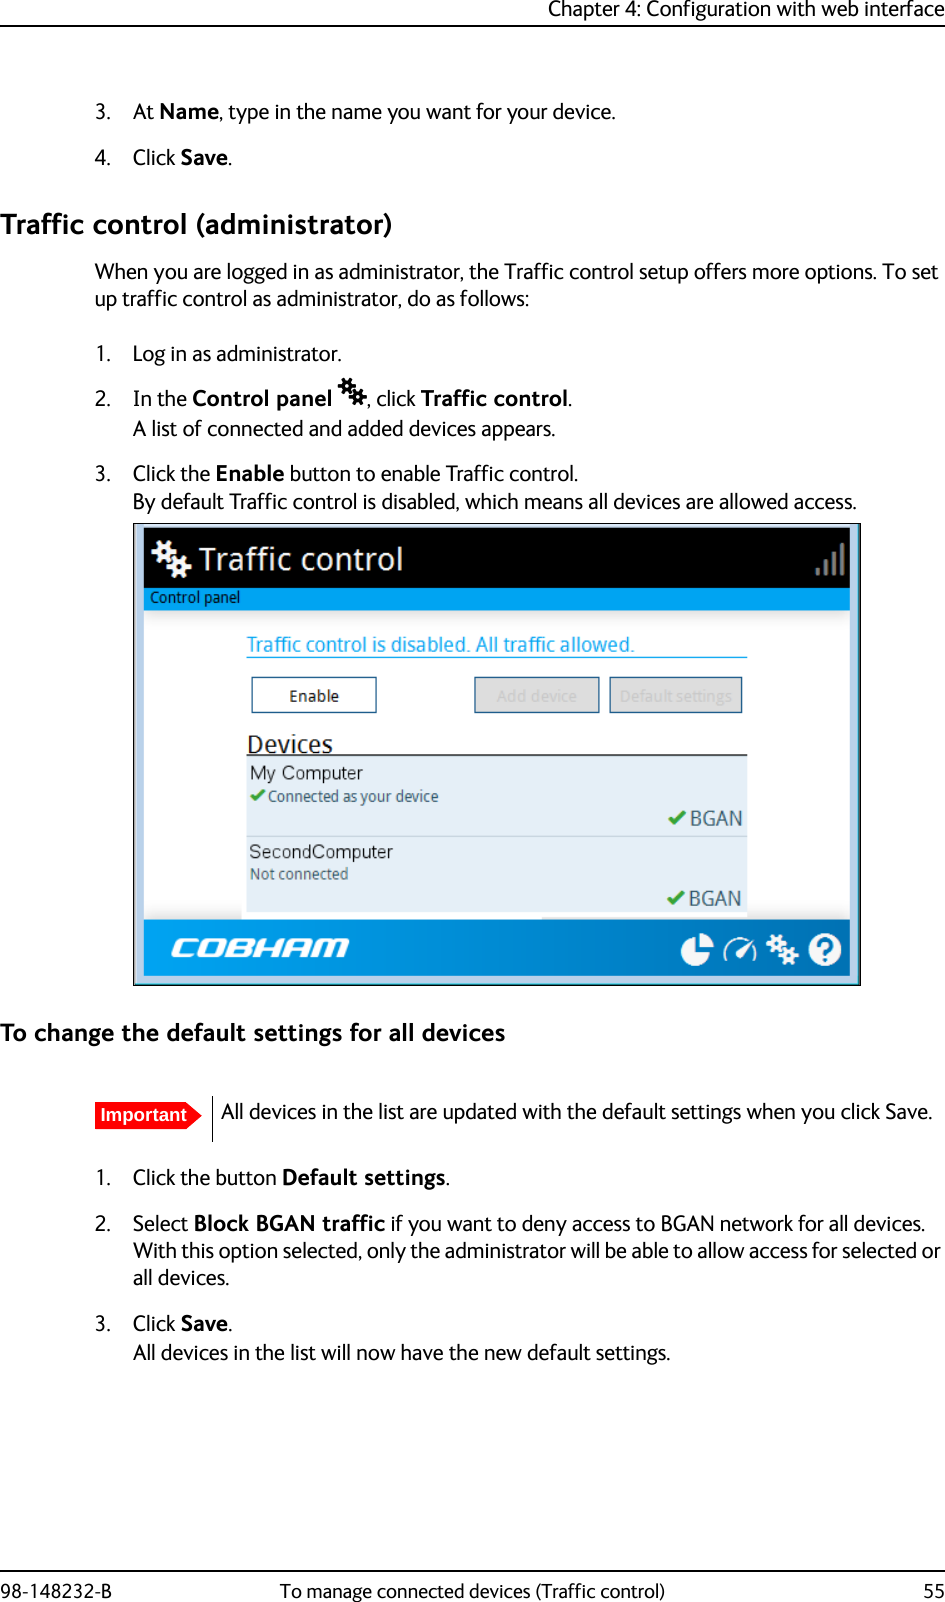 Chapter 4: Configuration with web interface98-148232-B To manage connected devices (Traffic control) 553. At Name, type in the name you want for your device.4. Click Save.Traffic control (administrator)When you are logged in as administrator, the Traffic control setup offers more options. To set up traffic control as administrator, do as follows:1. Log in as administrator.2. In the Control panel , click Traffic control.A list of connected and added devices appears.3. Click the Enable button to enable Traffic control.By default Traffic control is disabled, which means all devices are allowed access.To change the default settings for all devices1. Click the button Default settings.2. Select Block BGAN traffic if you want to deny access to BGAN network for all devices. With this option selected, only the administrator will be able to allow access for selected or all devices.3. Click Save.All devices in the list will now have the new default settings.ImportantAll devices in the list are updated with the default settings when you click Save. 